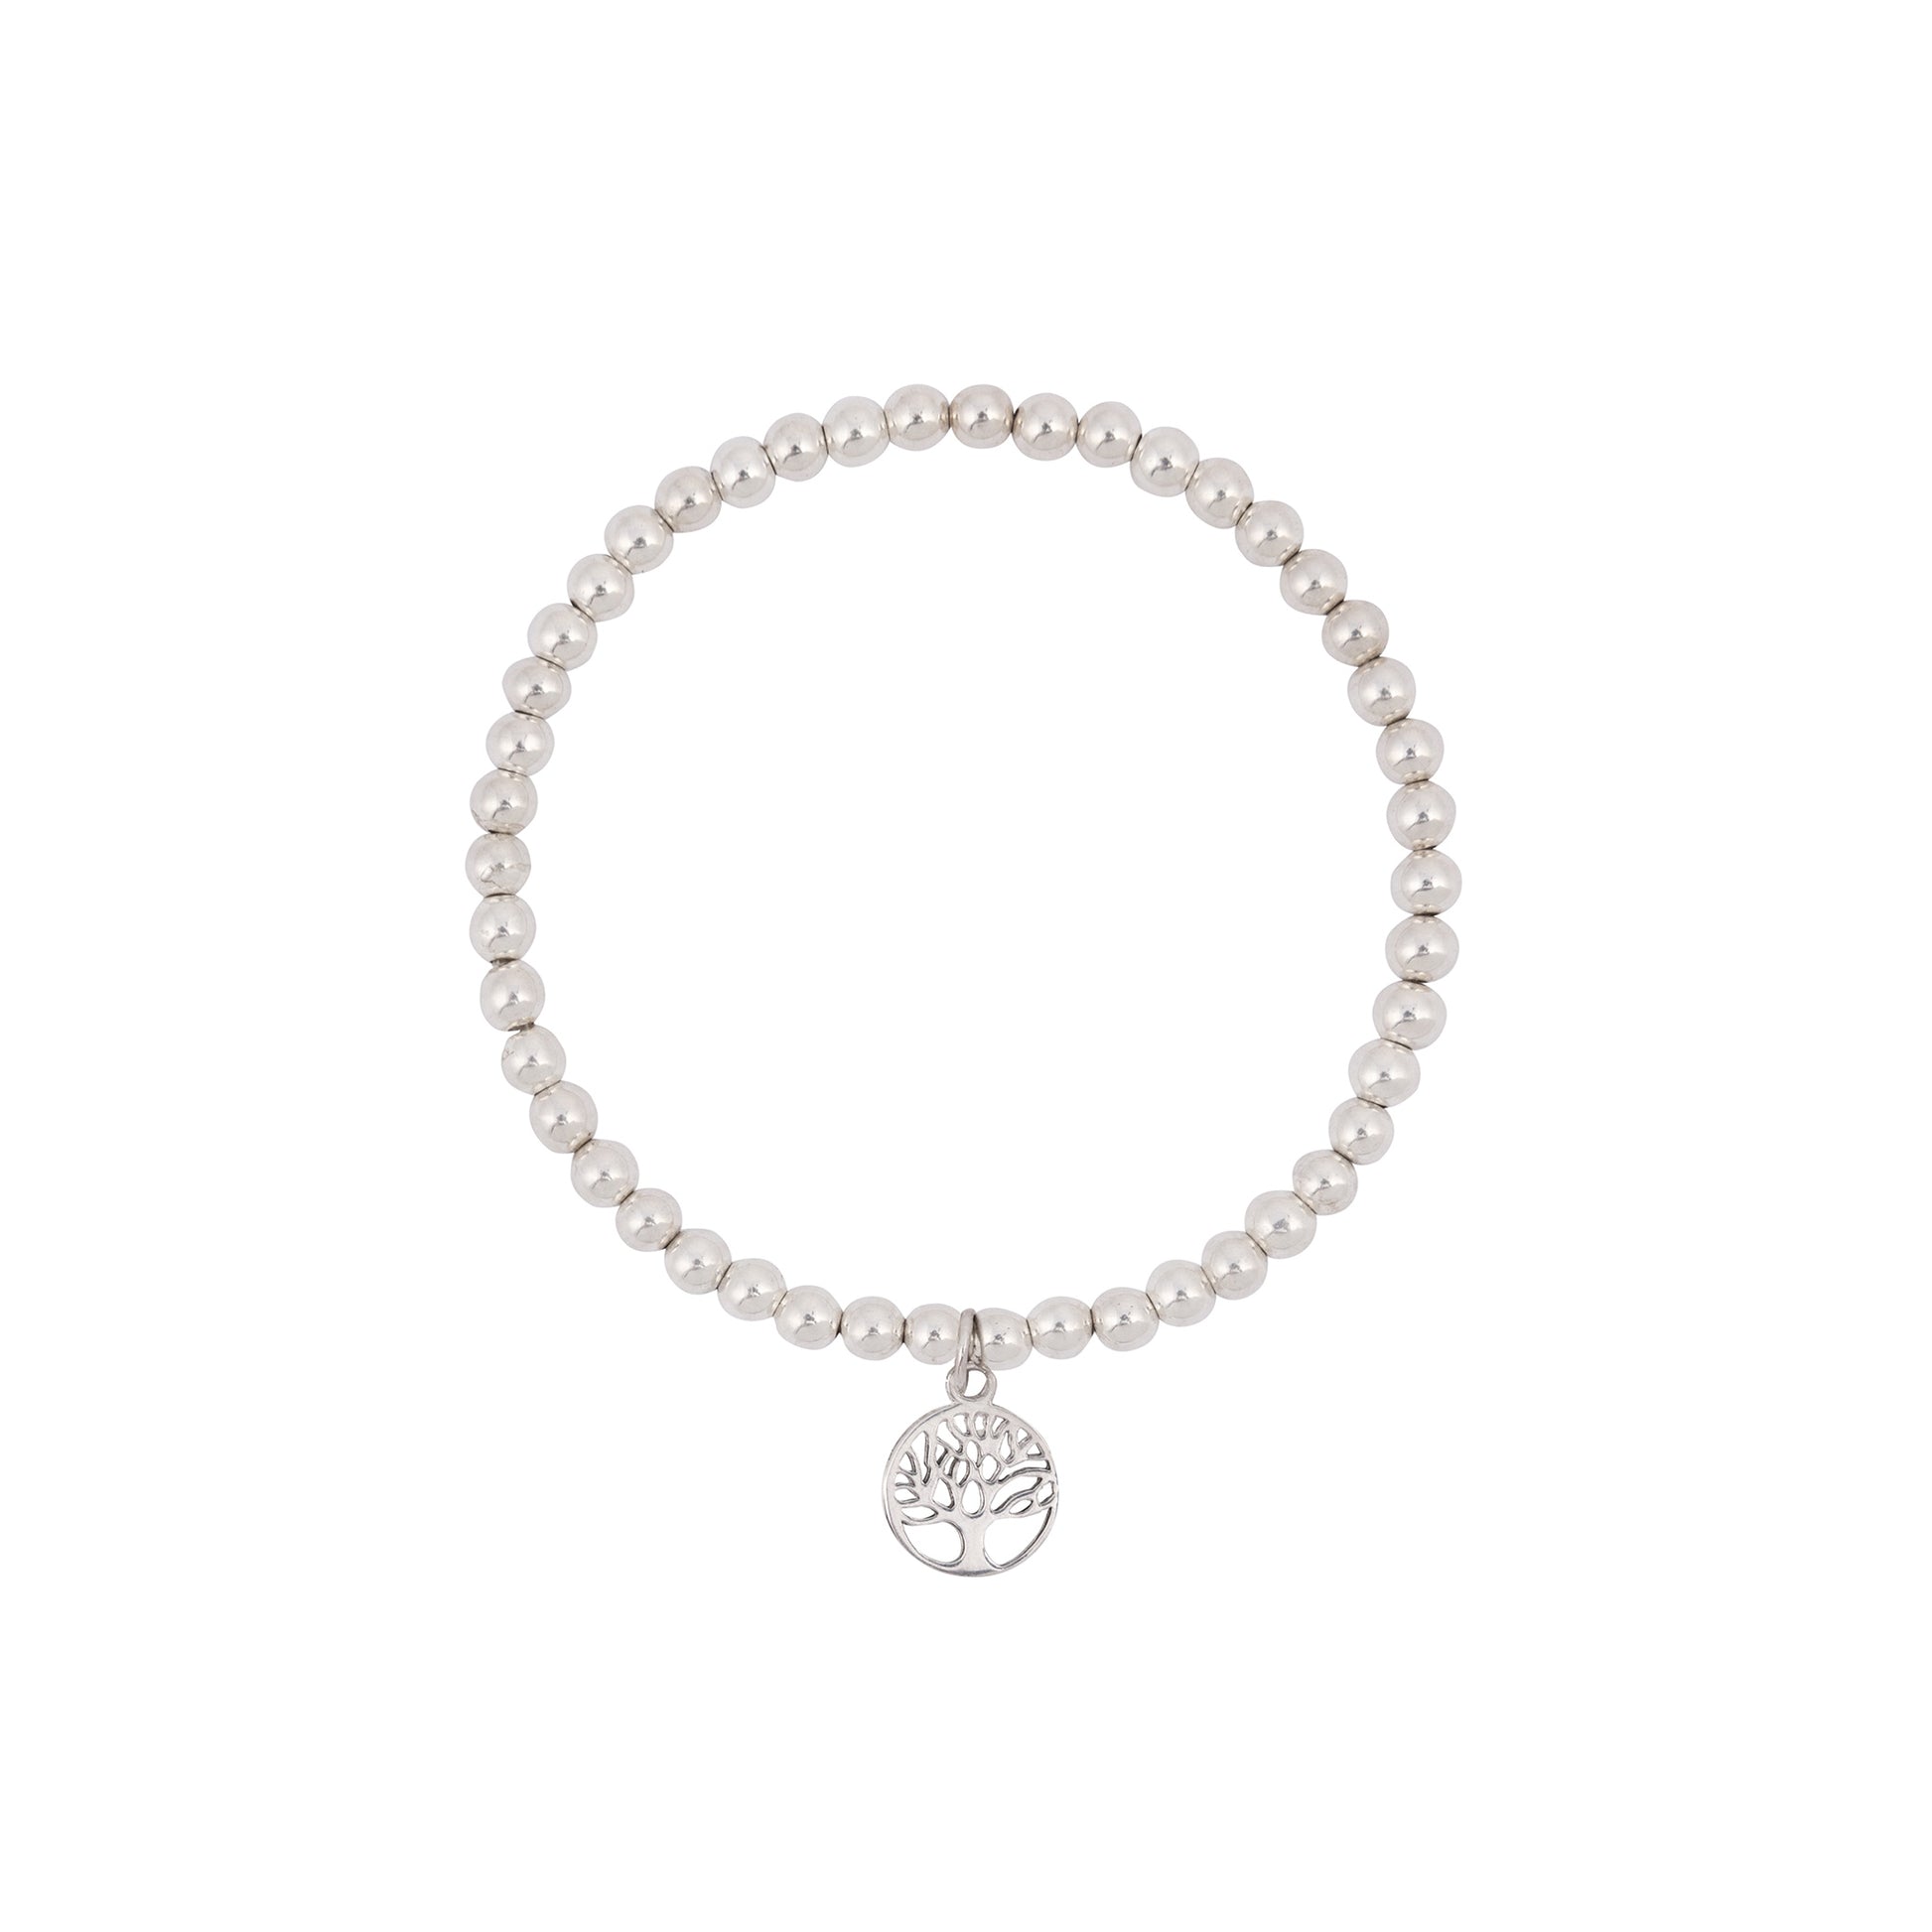 A sterling silver bracelet featuring evenly spaced round beads. A small pendant with a tree of life design hangs from the bracelet, centered among the beads. Ideal for those who appreciate the Tree of Life Silver Bracelet by Made Here with Love, it is set against a plain white background.